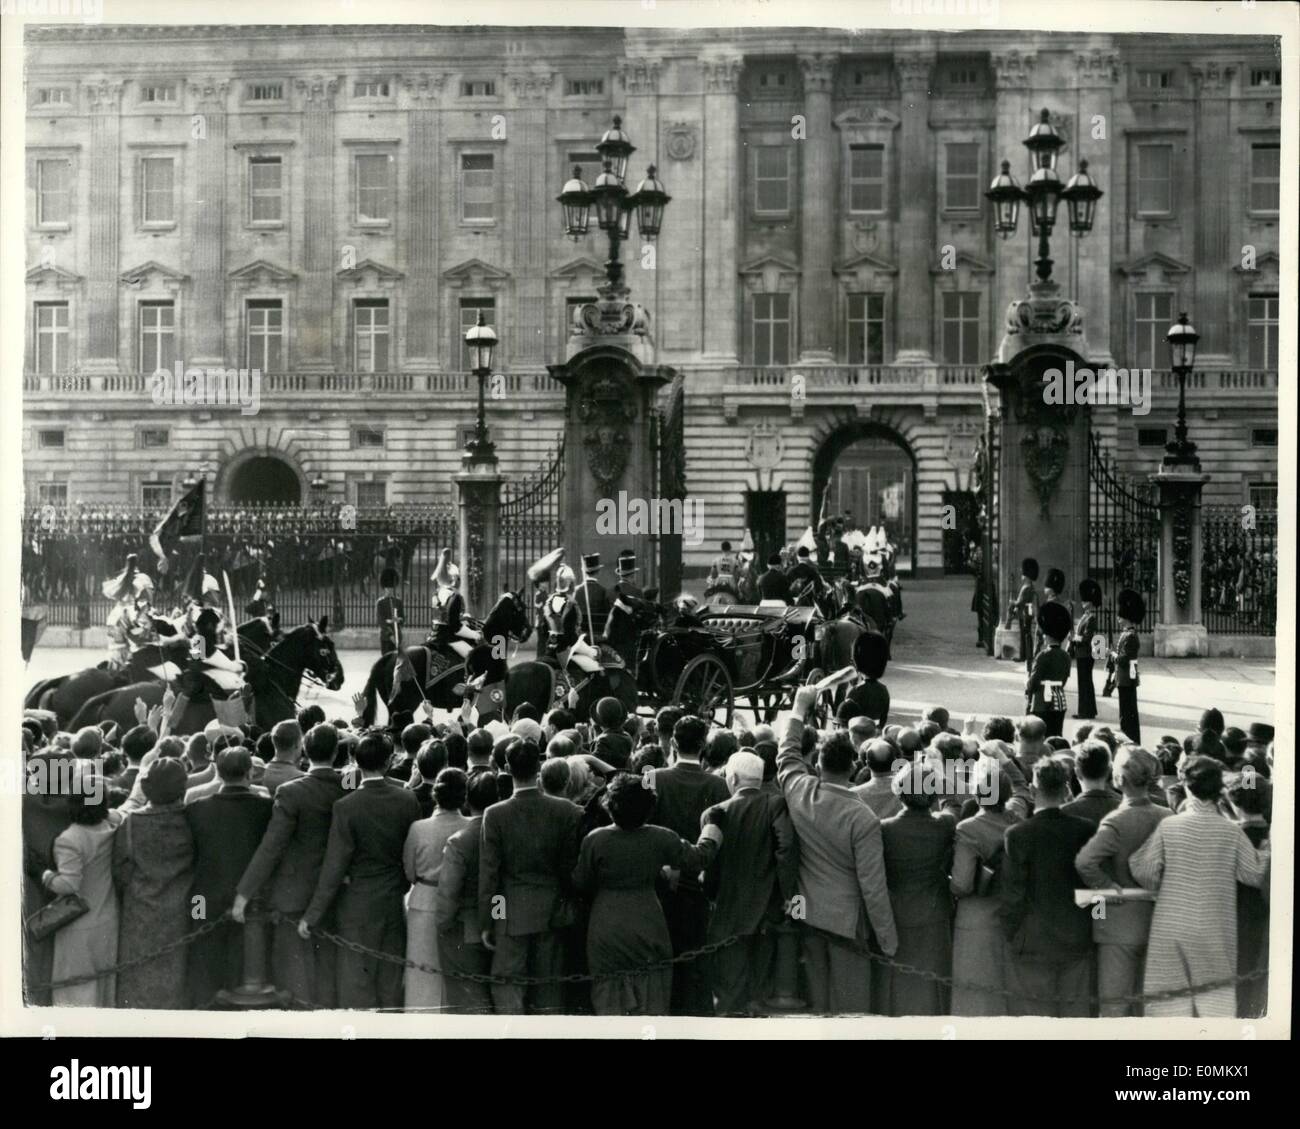 Oct. 10, 1955 - President of Portugal arrives in London. procession entering the Palace. Photo shows view of the State procession entering Buckingham Palace - on the arrival of the President of Portugal this afternoon. Stock Photo